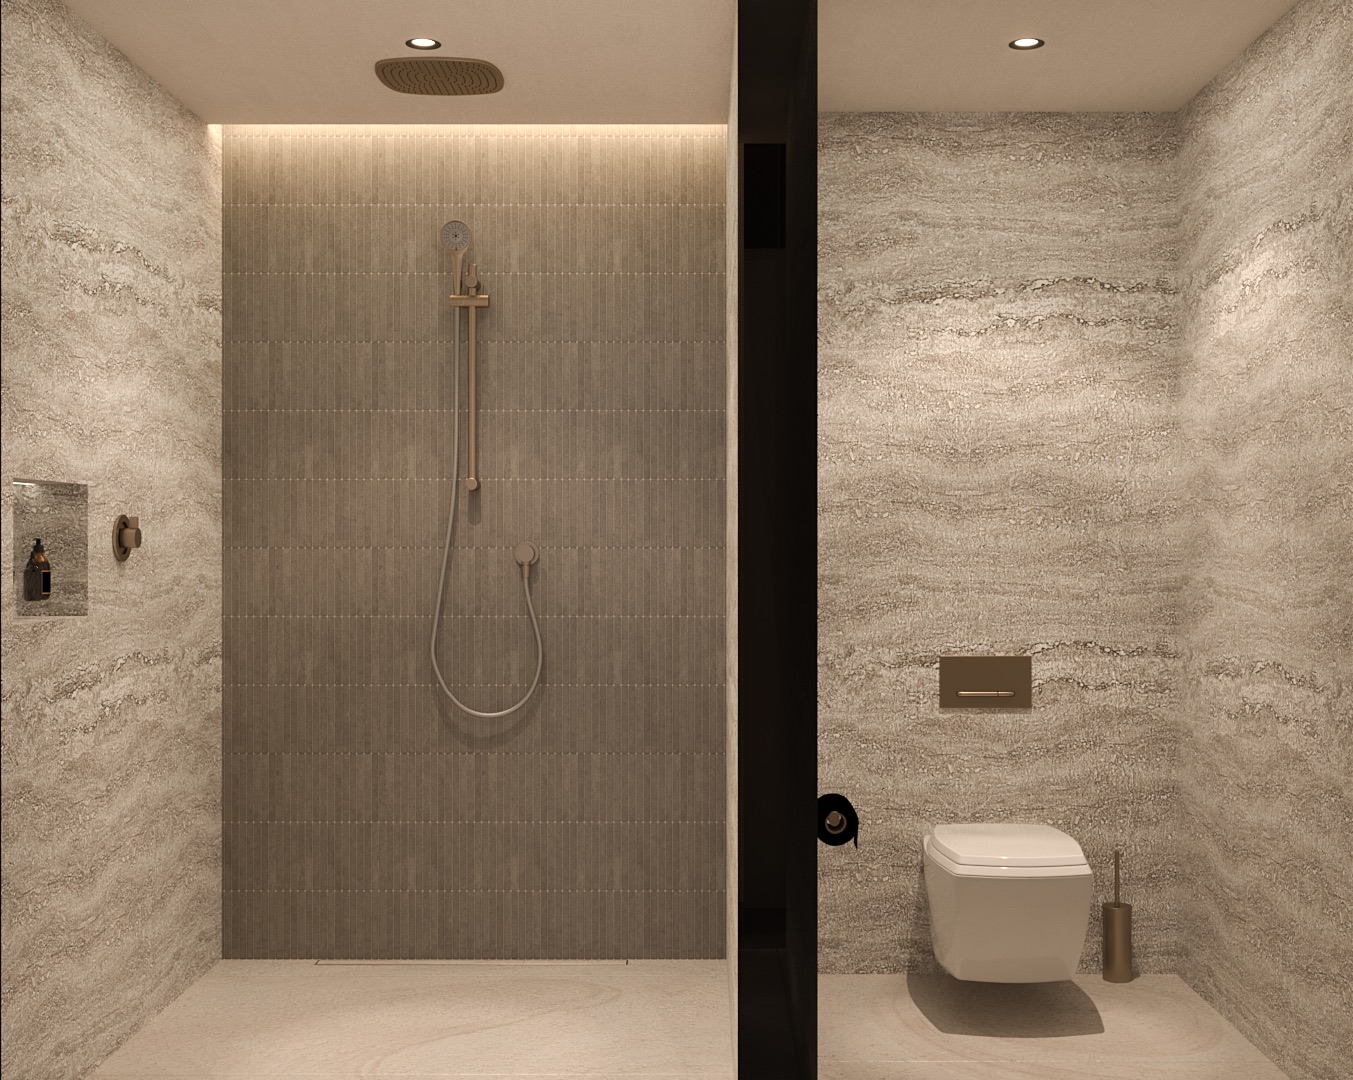 Large grey walk-in shower with glass doors and small toilet to the right